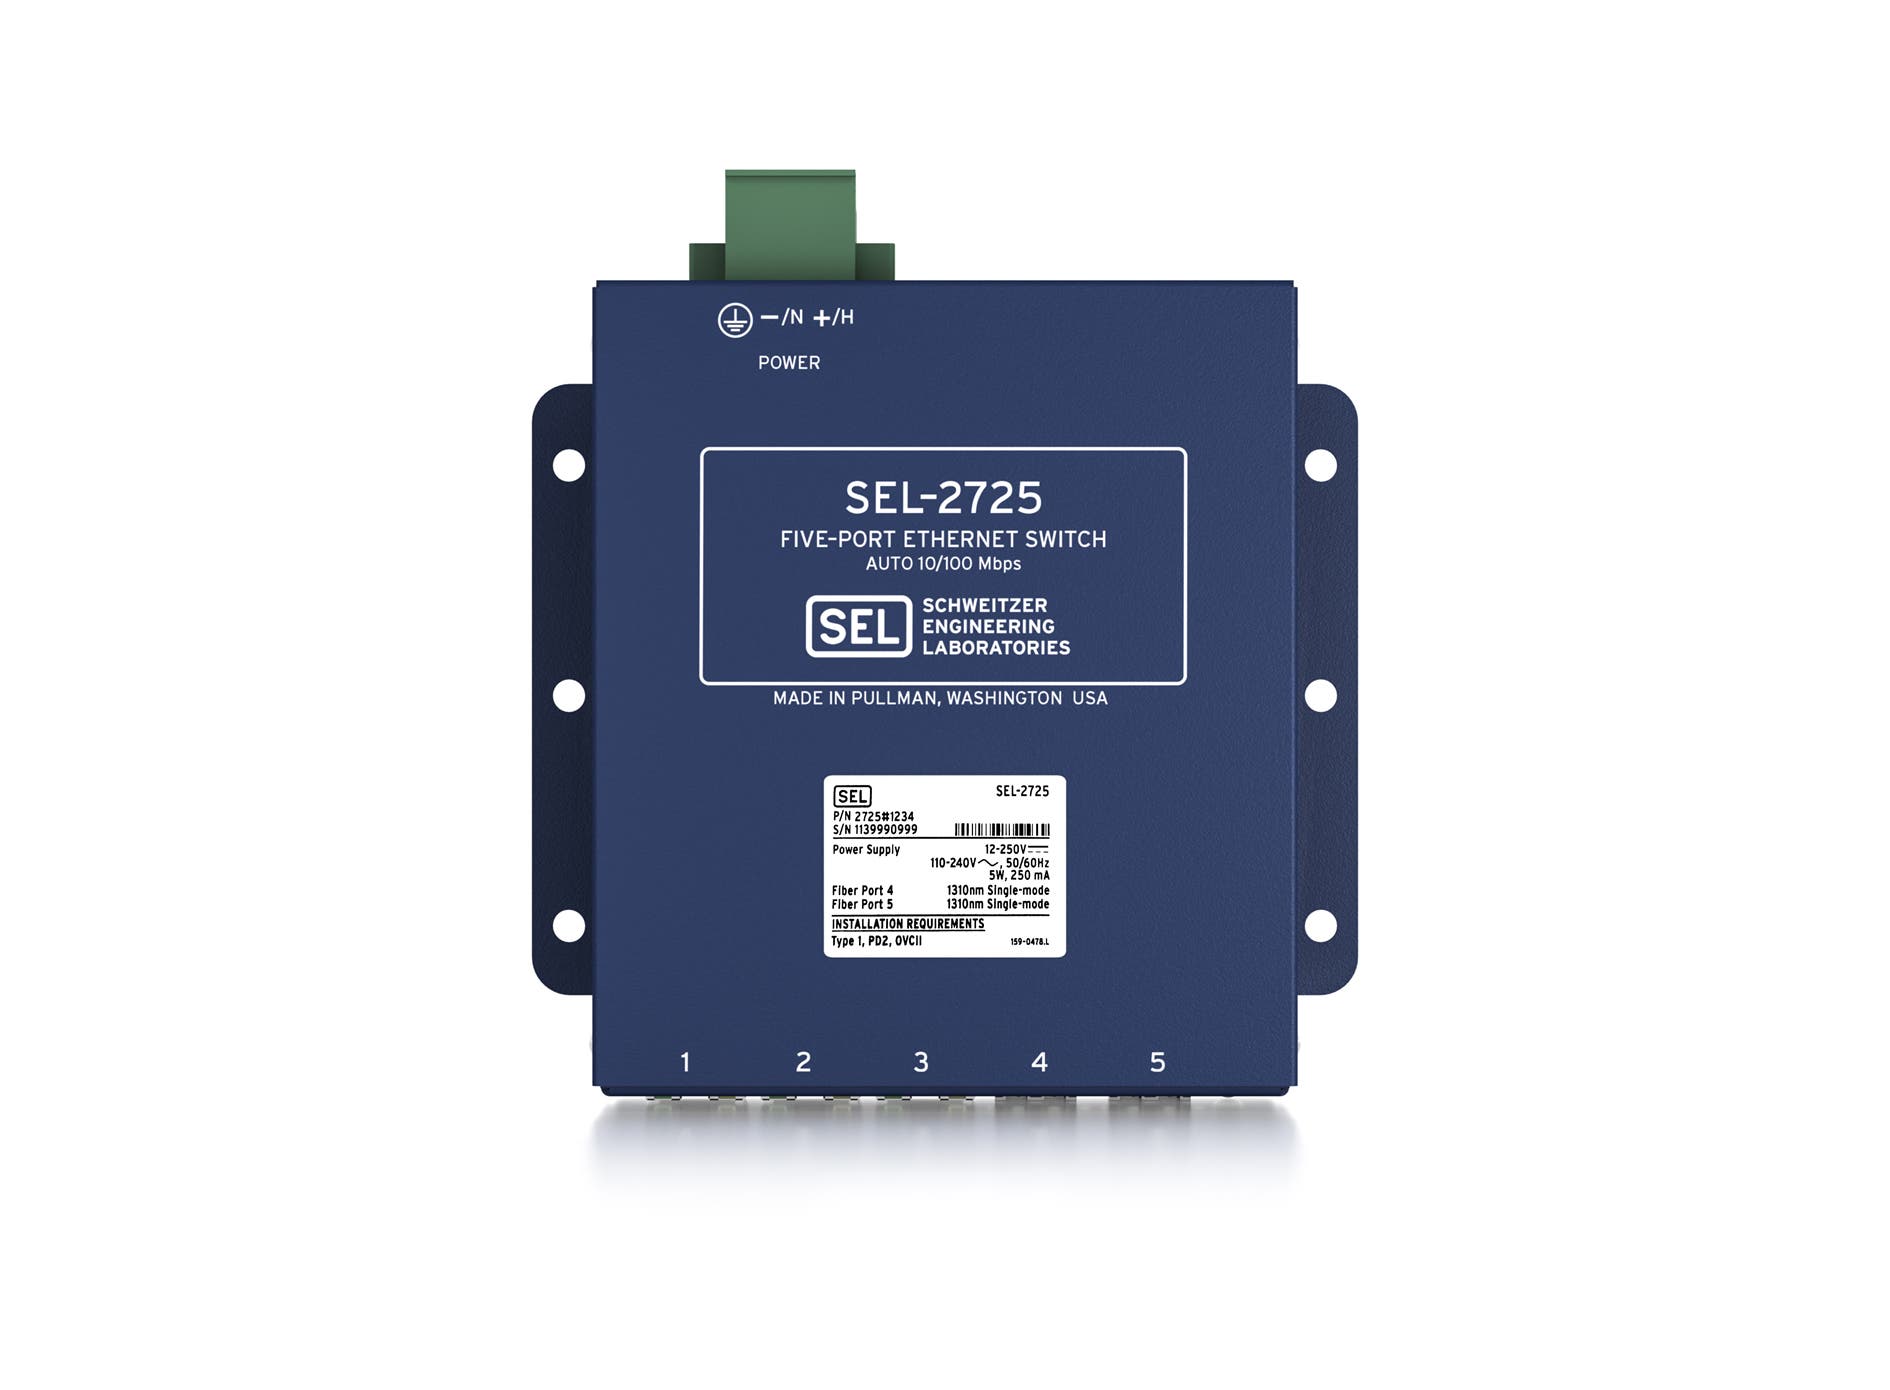 SEL releases enhanced SEL-2725 Five-Port Ethernet Switch